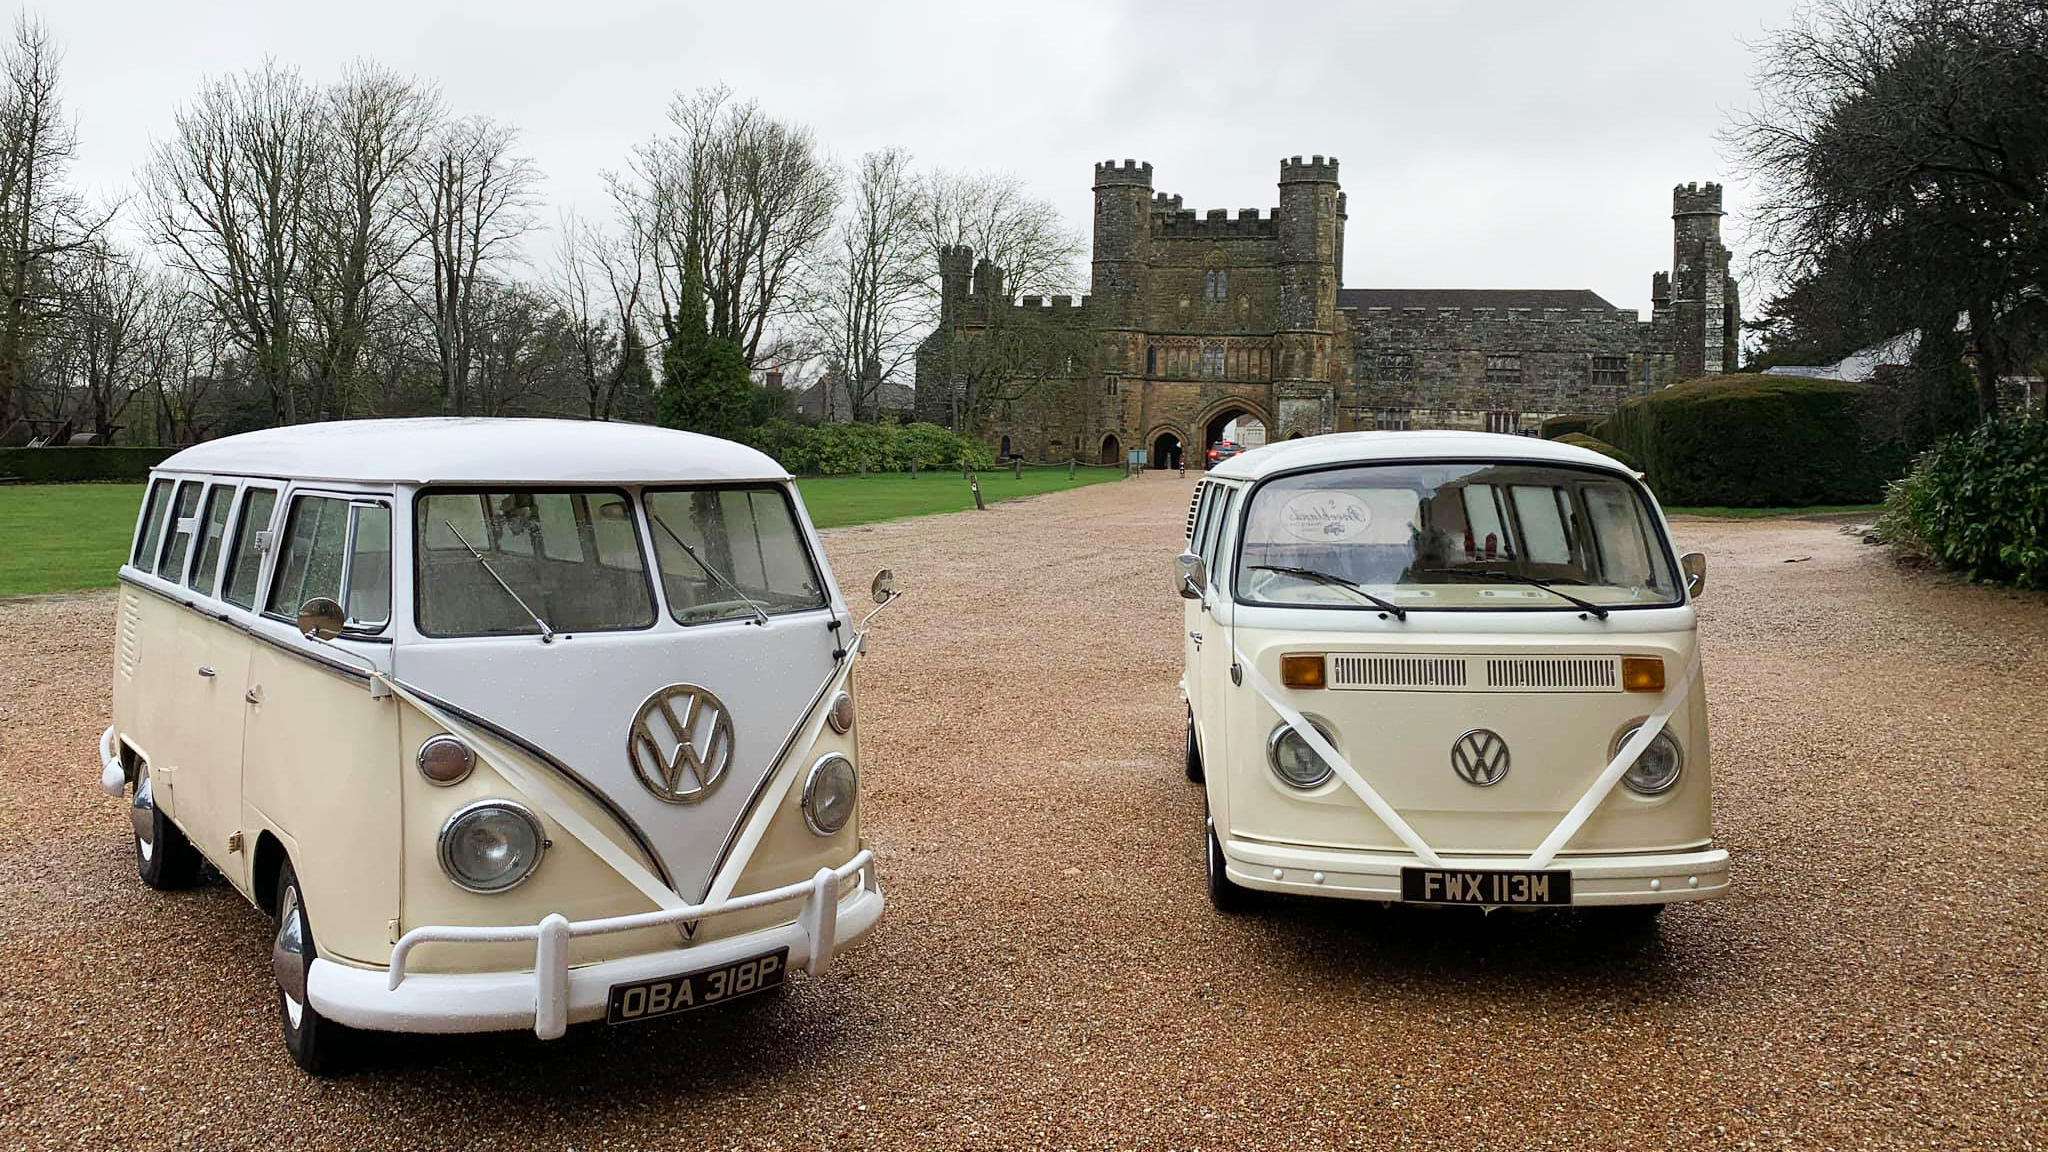 Two Classic Volkswagen Campervans in Cream an White with matching Blue Ribbons in front of Battle Abbey in Sussex.